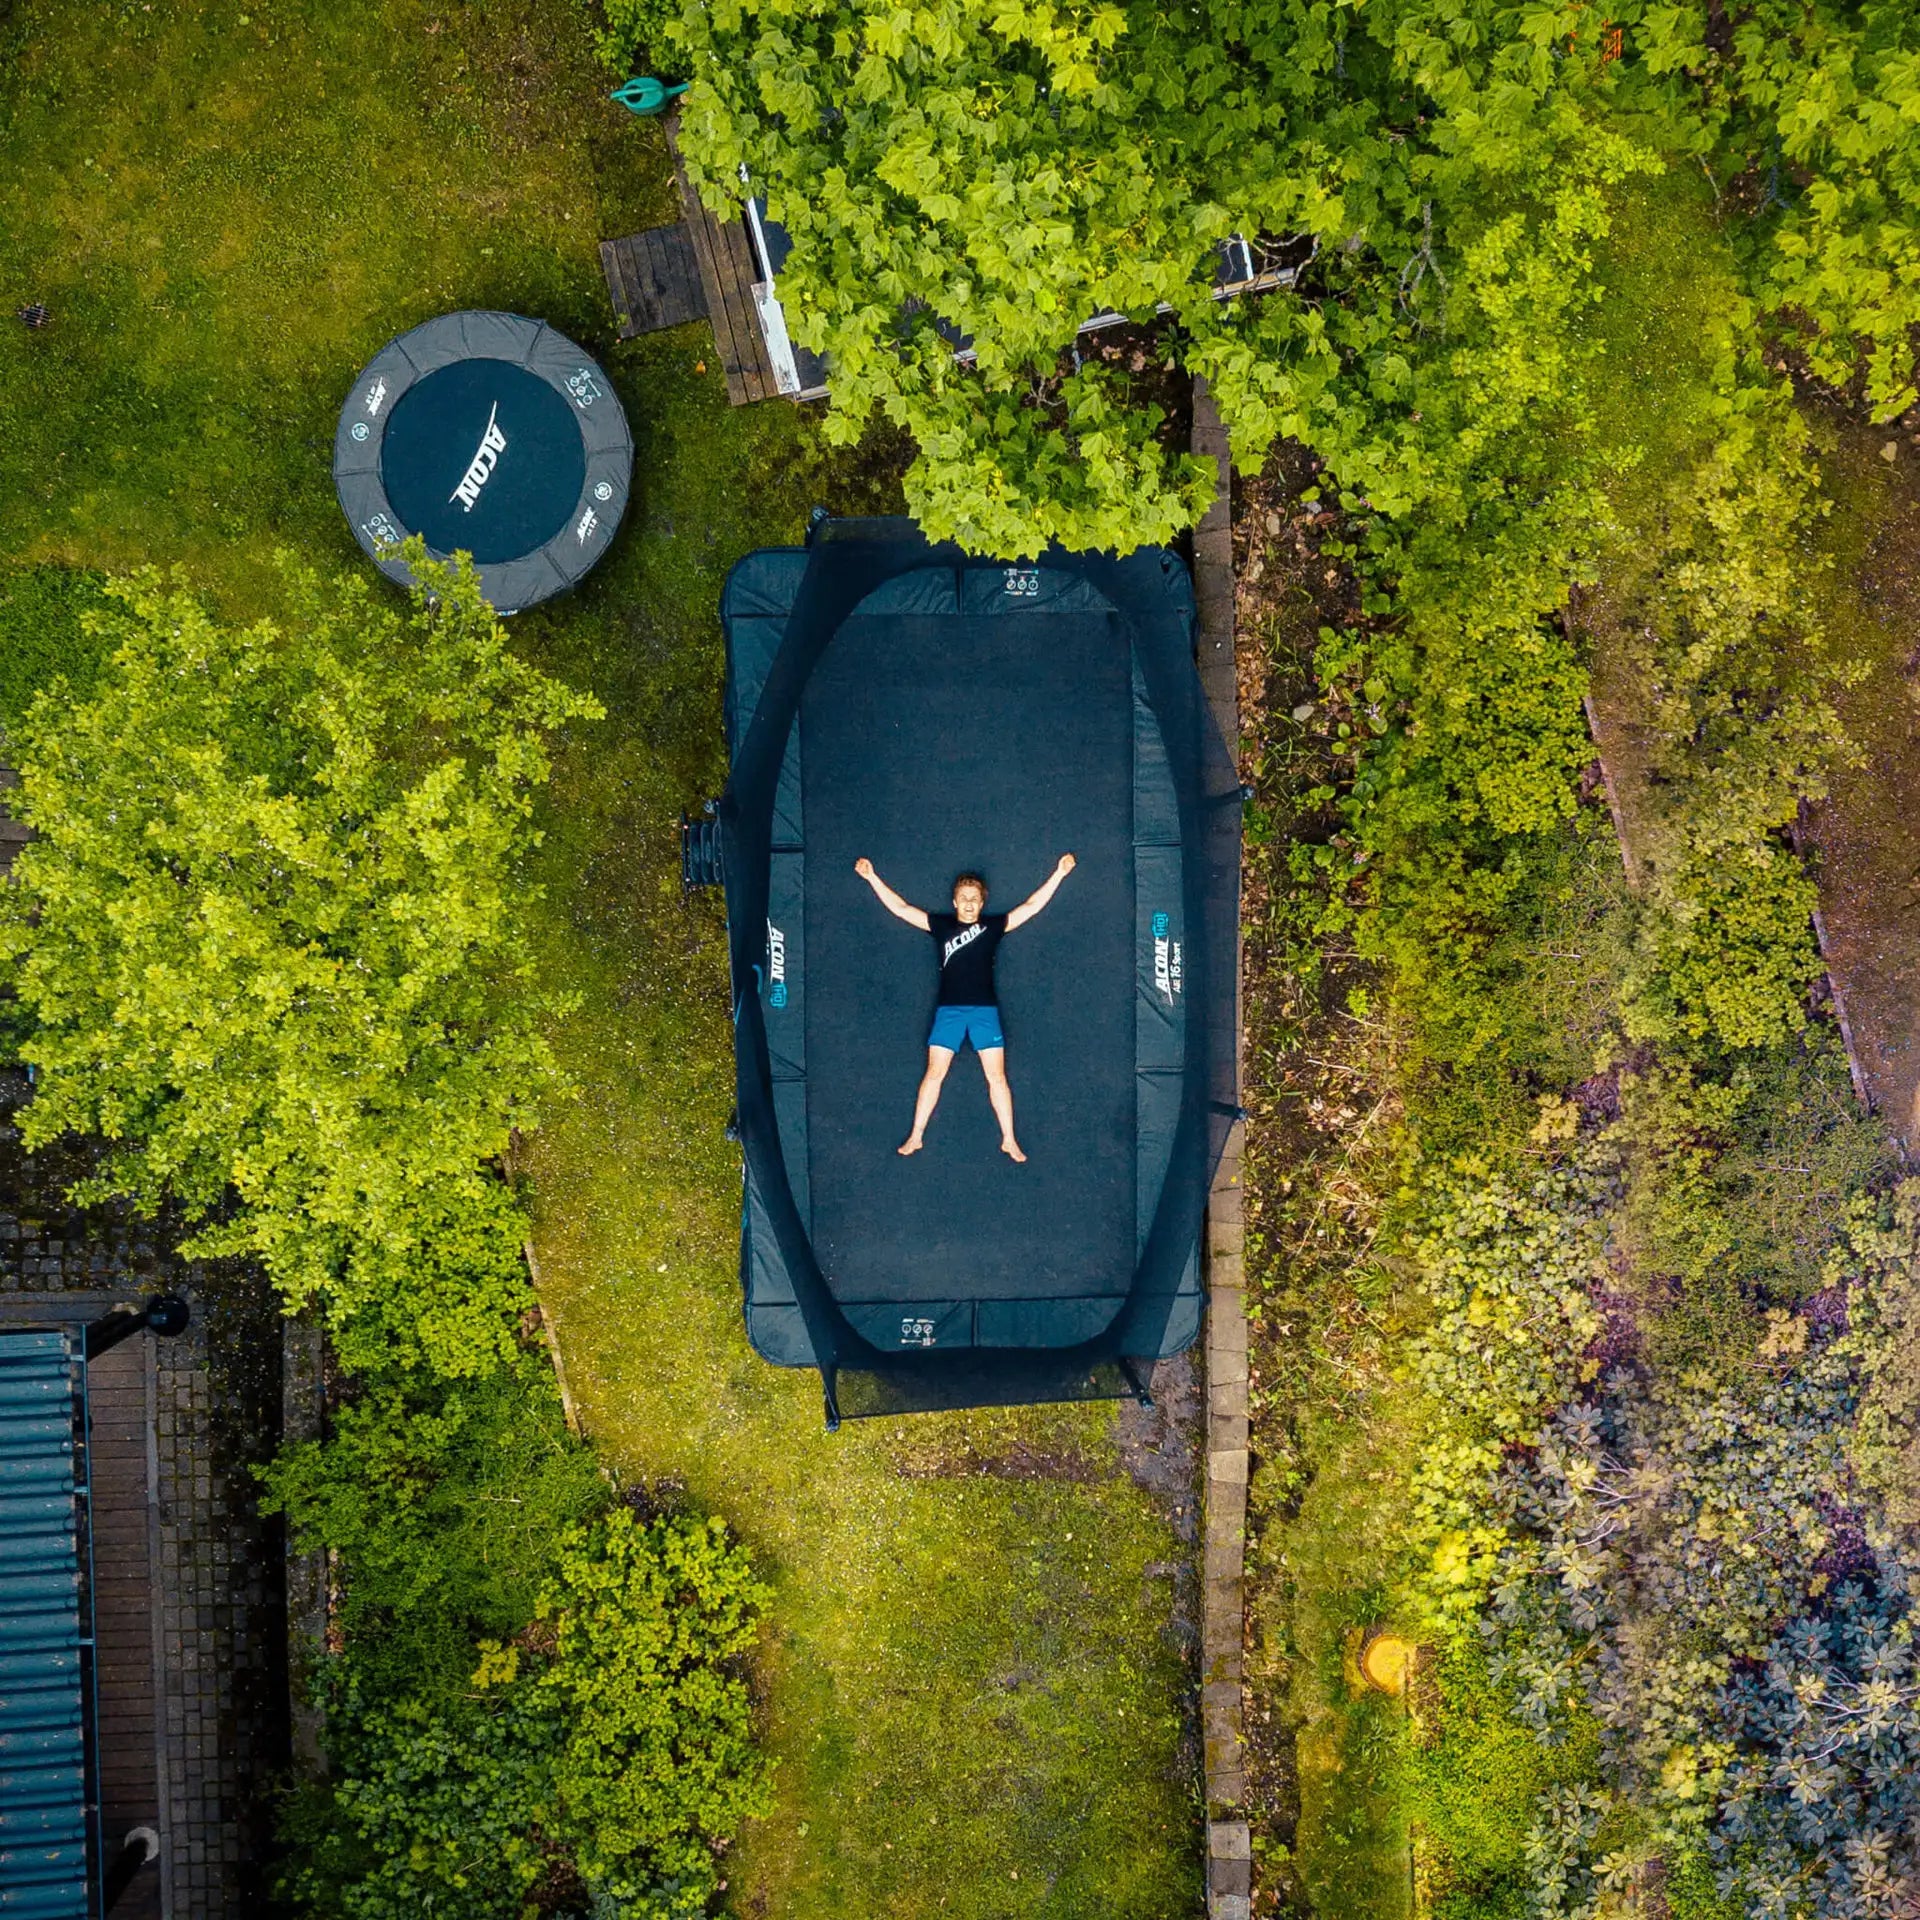 A boy laying on an Acon trampoline. Picture taken from bird's eye view.